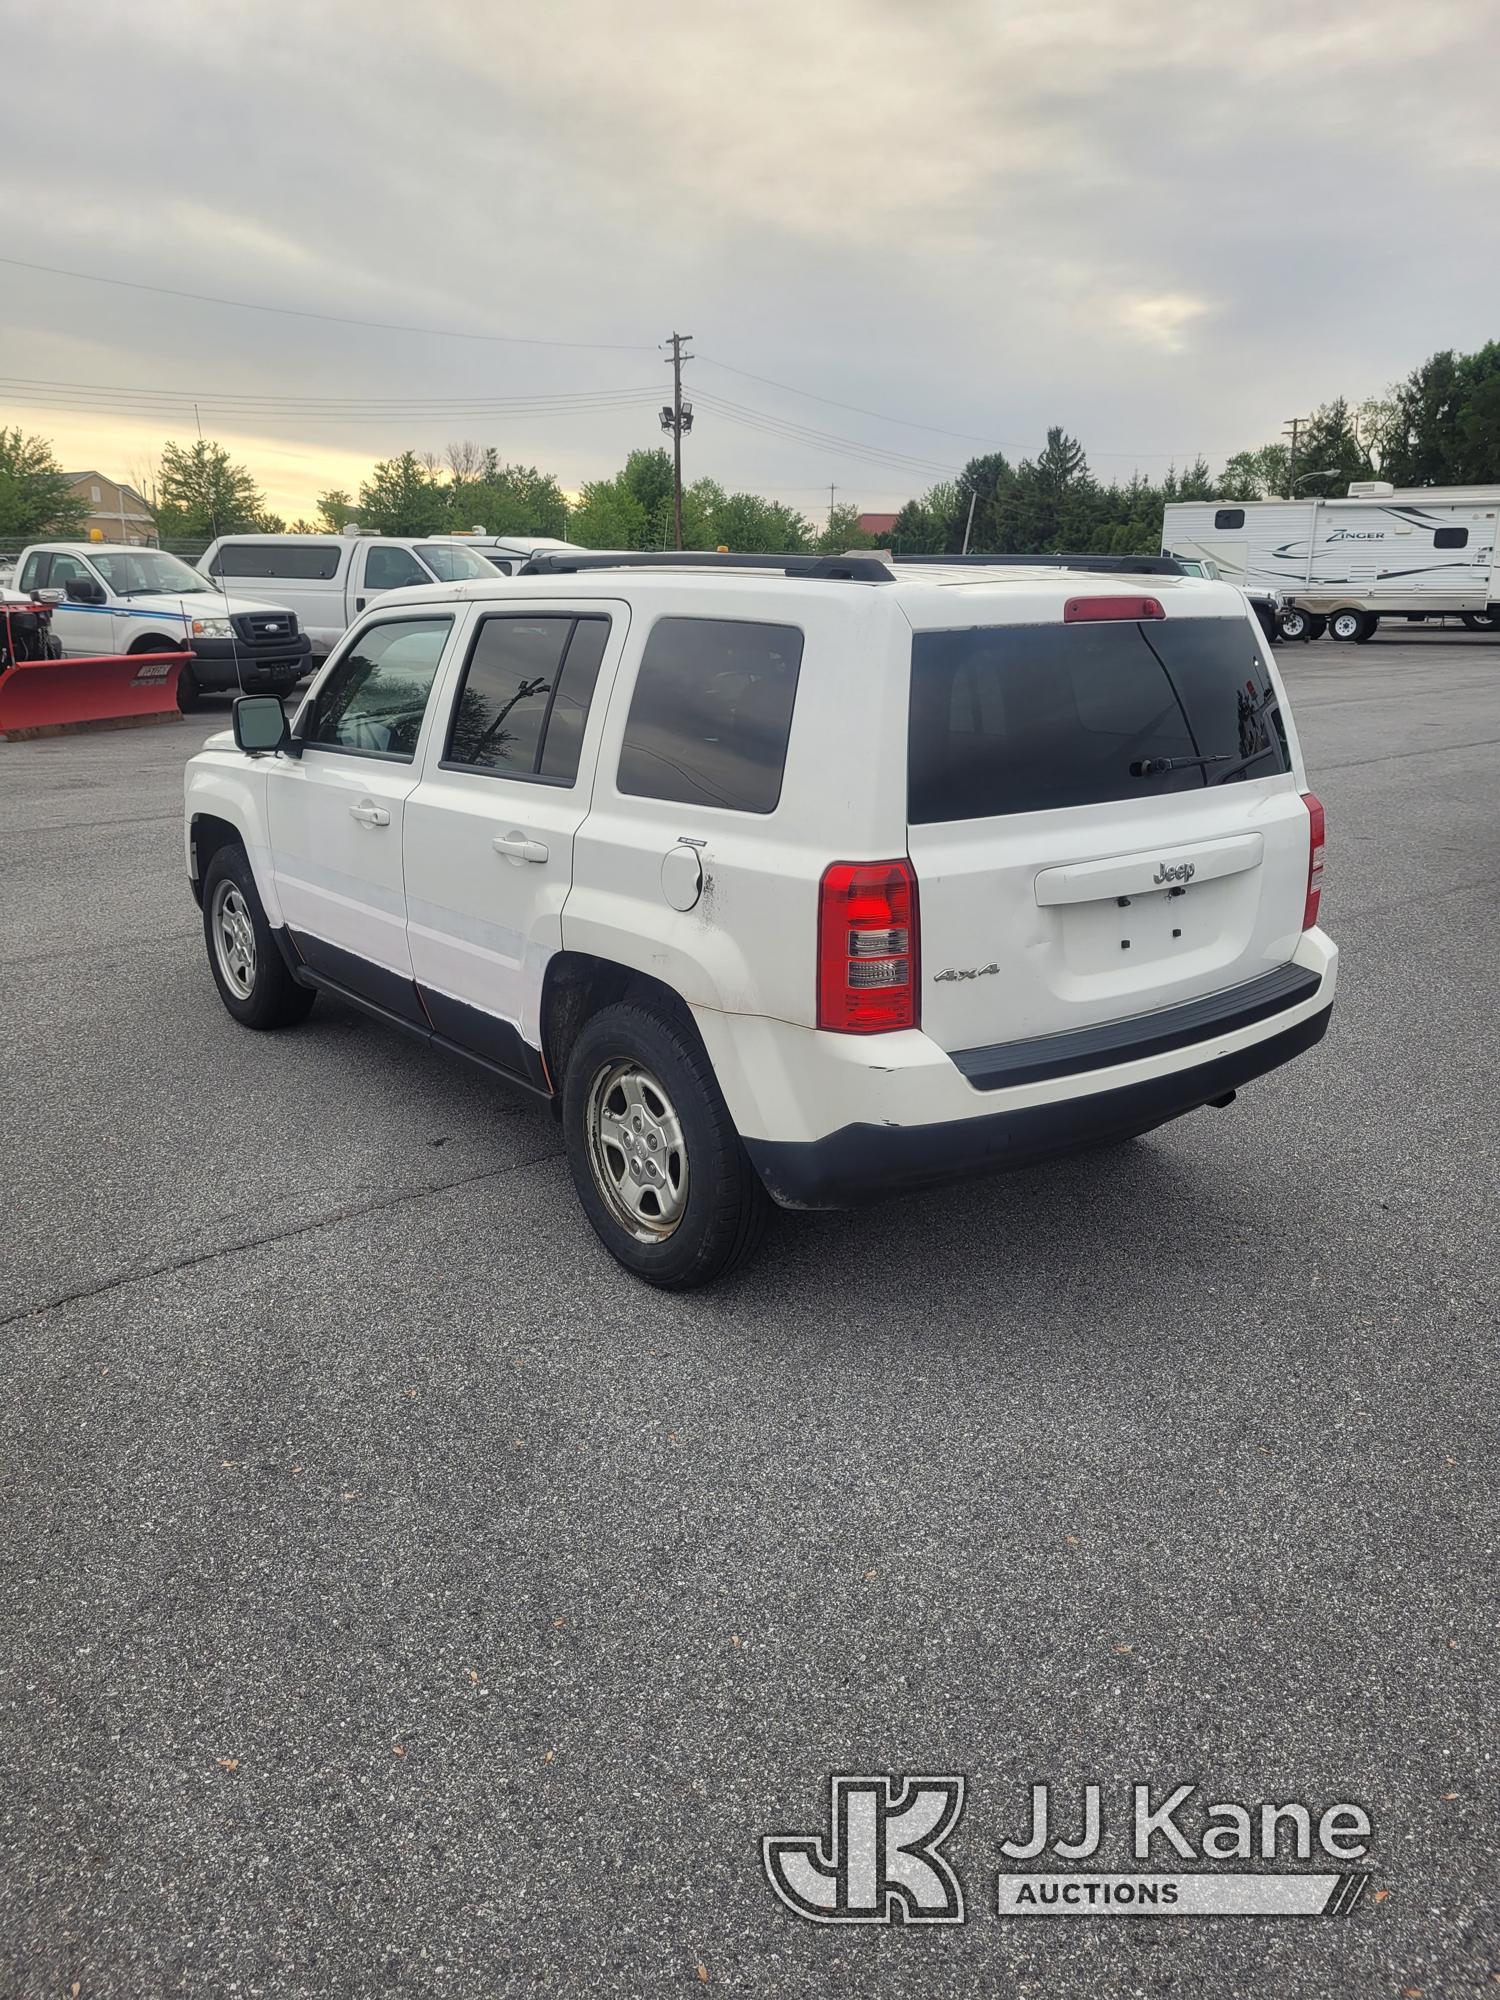 (Chester Springs, PA) 2014 Jeep Patriot 4x4 4-Door Sport Utility Vehicle Runs & Moves, Check Engine